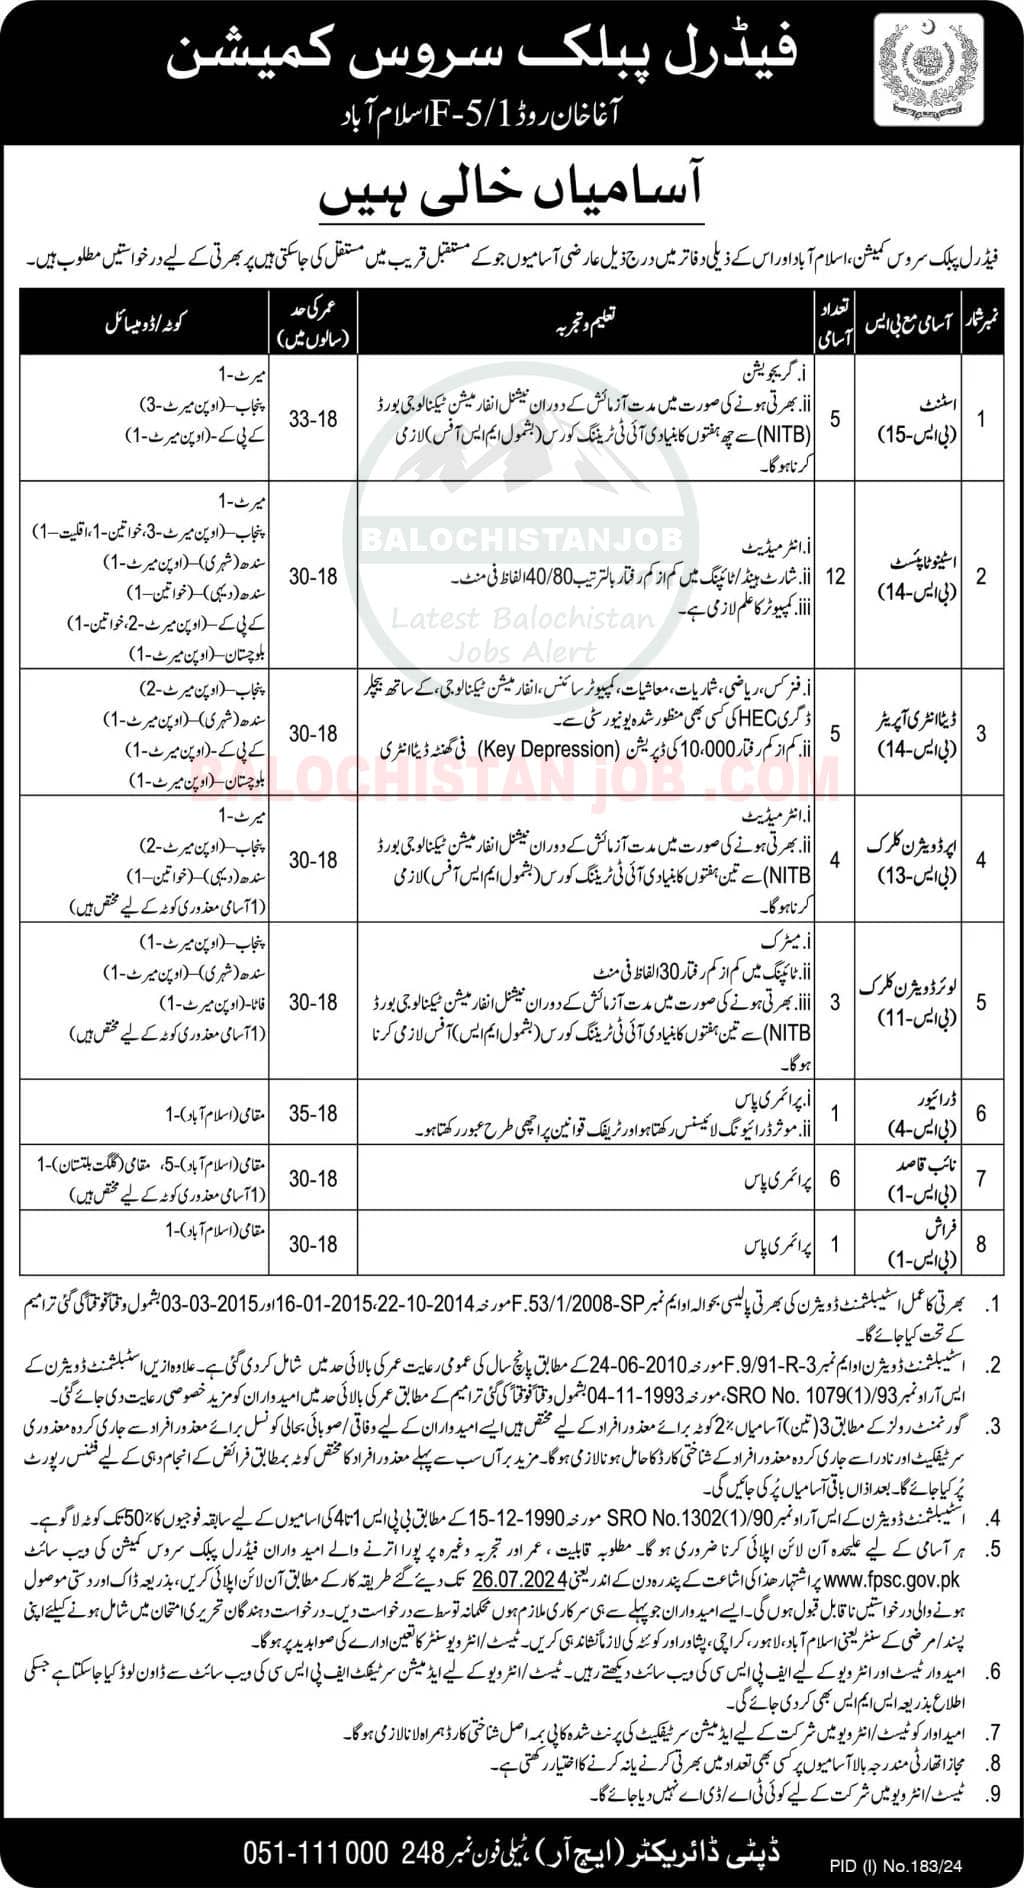 It is the Official Advertisement of Federal Public Service Commission FPSC Jobs 2024.